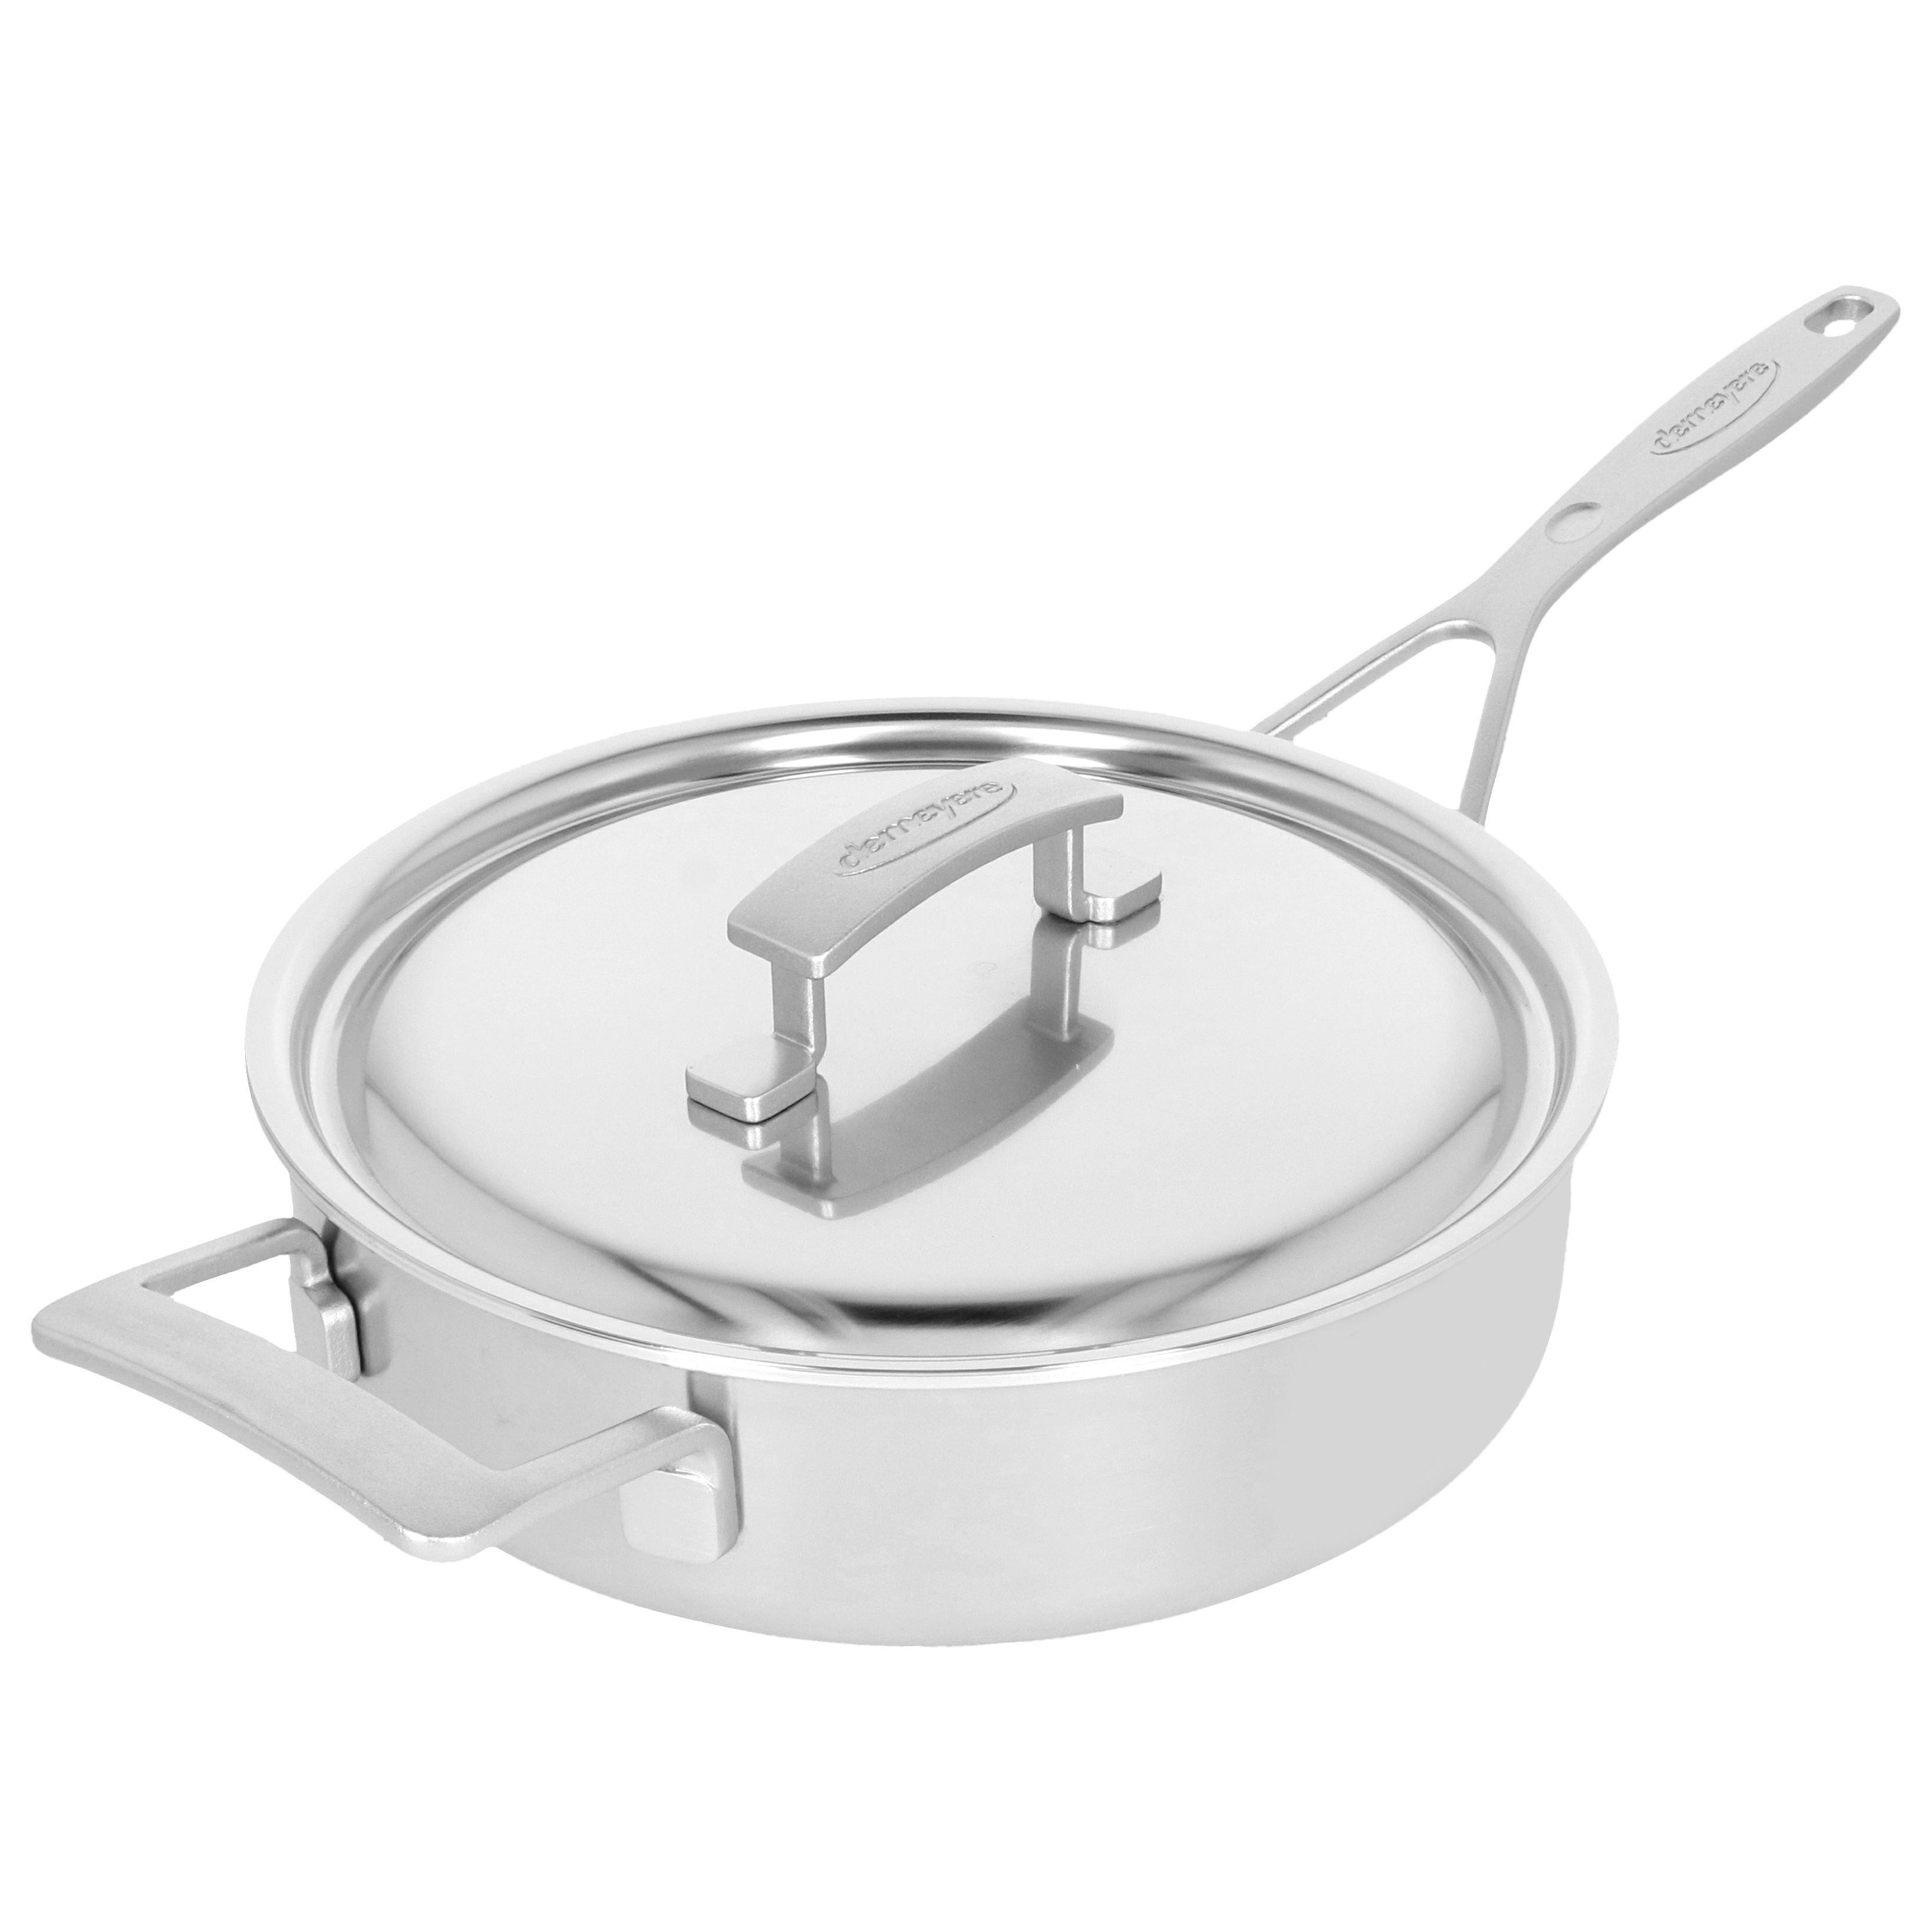 Demeyere Industry 5-Ply Sauté Pan, 3QT, Made in Belgium, Stainless Steel on  Food52